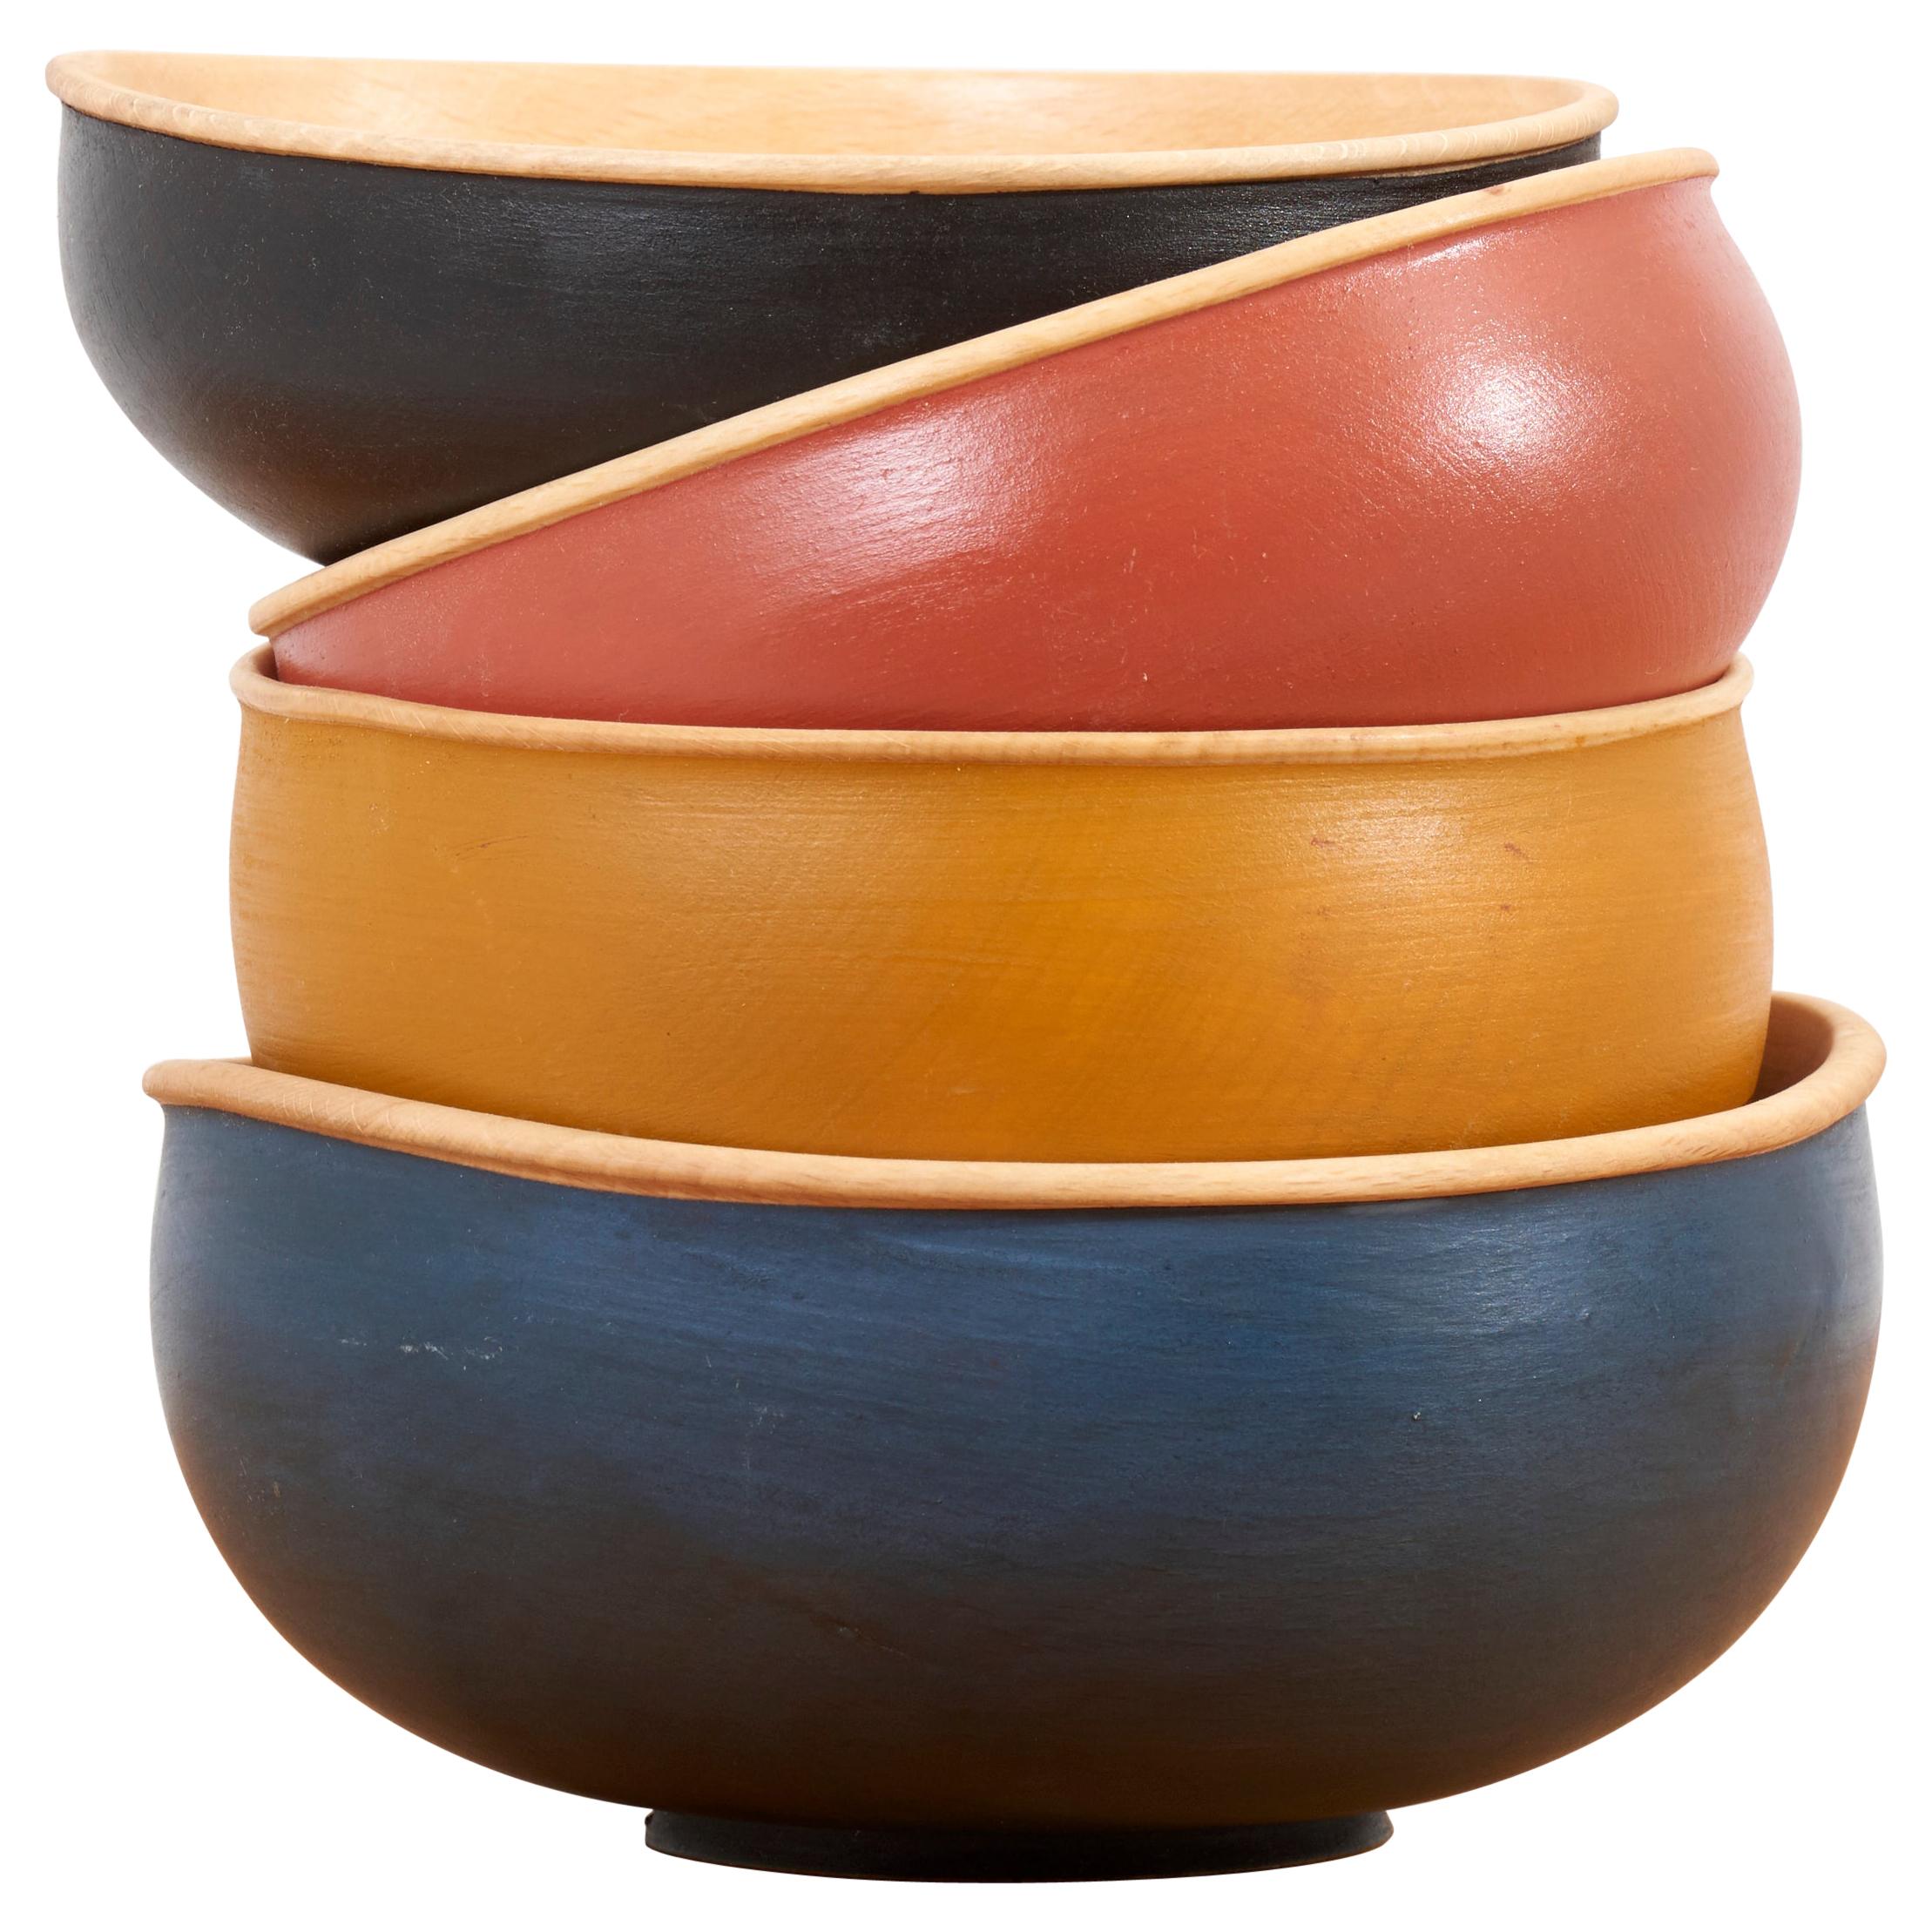 Set of 4 Wooden Bowls by Fabian Fischer, Germany, 2020